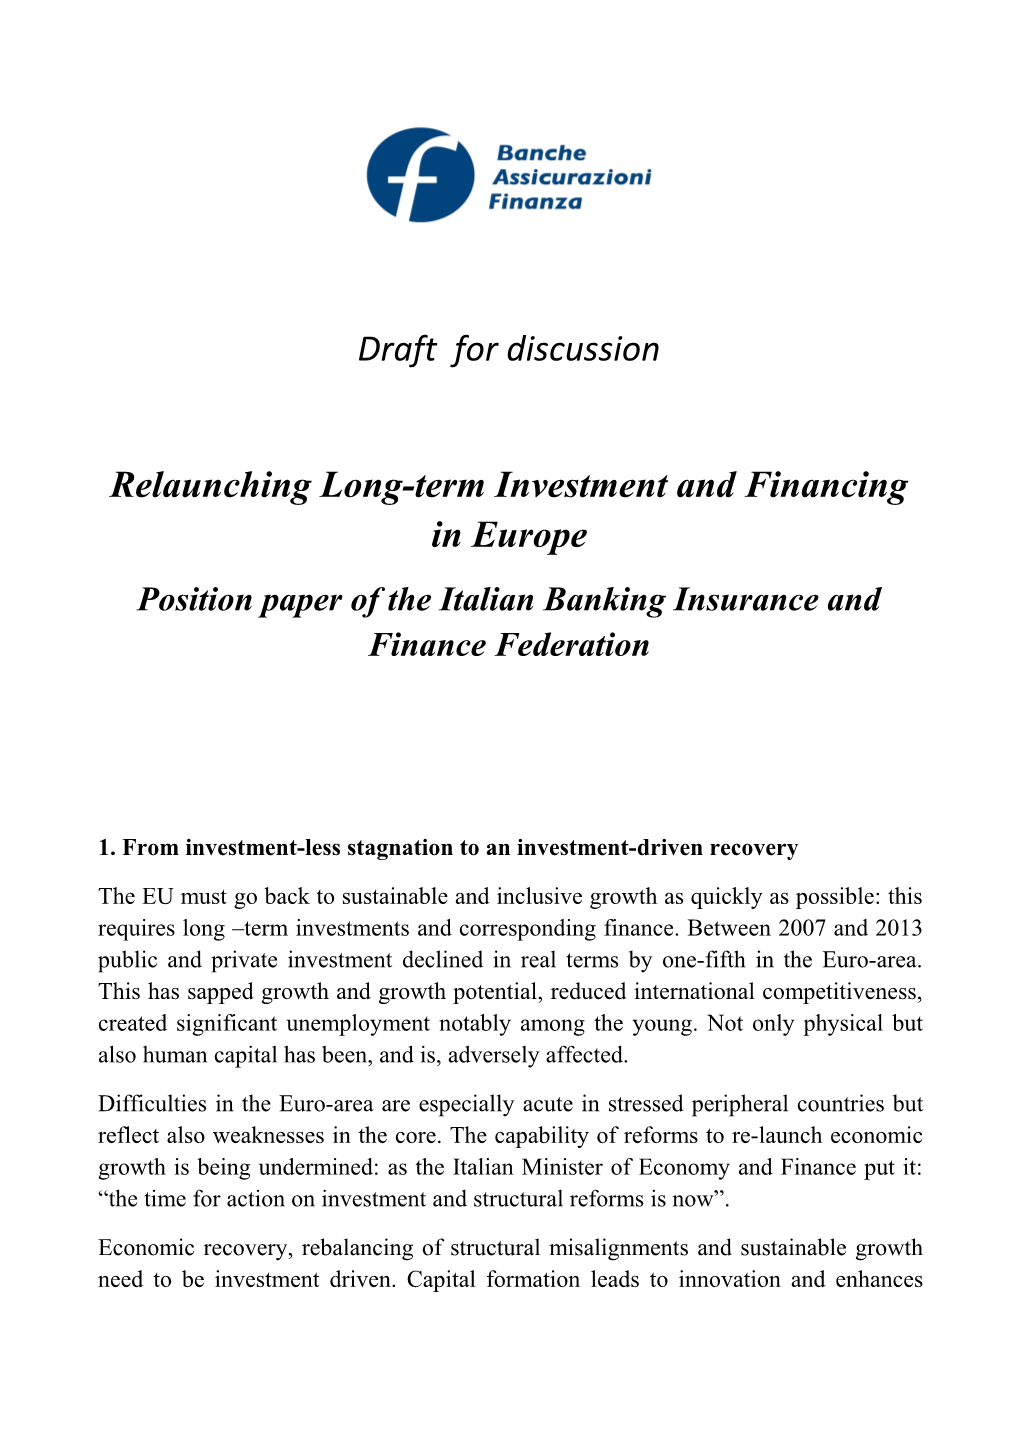 Relaunching Long-Term Investment and Financing in Europe